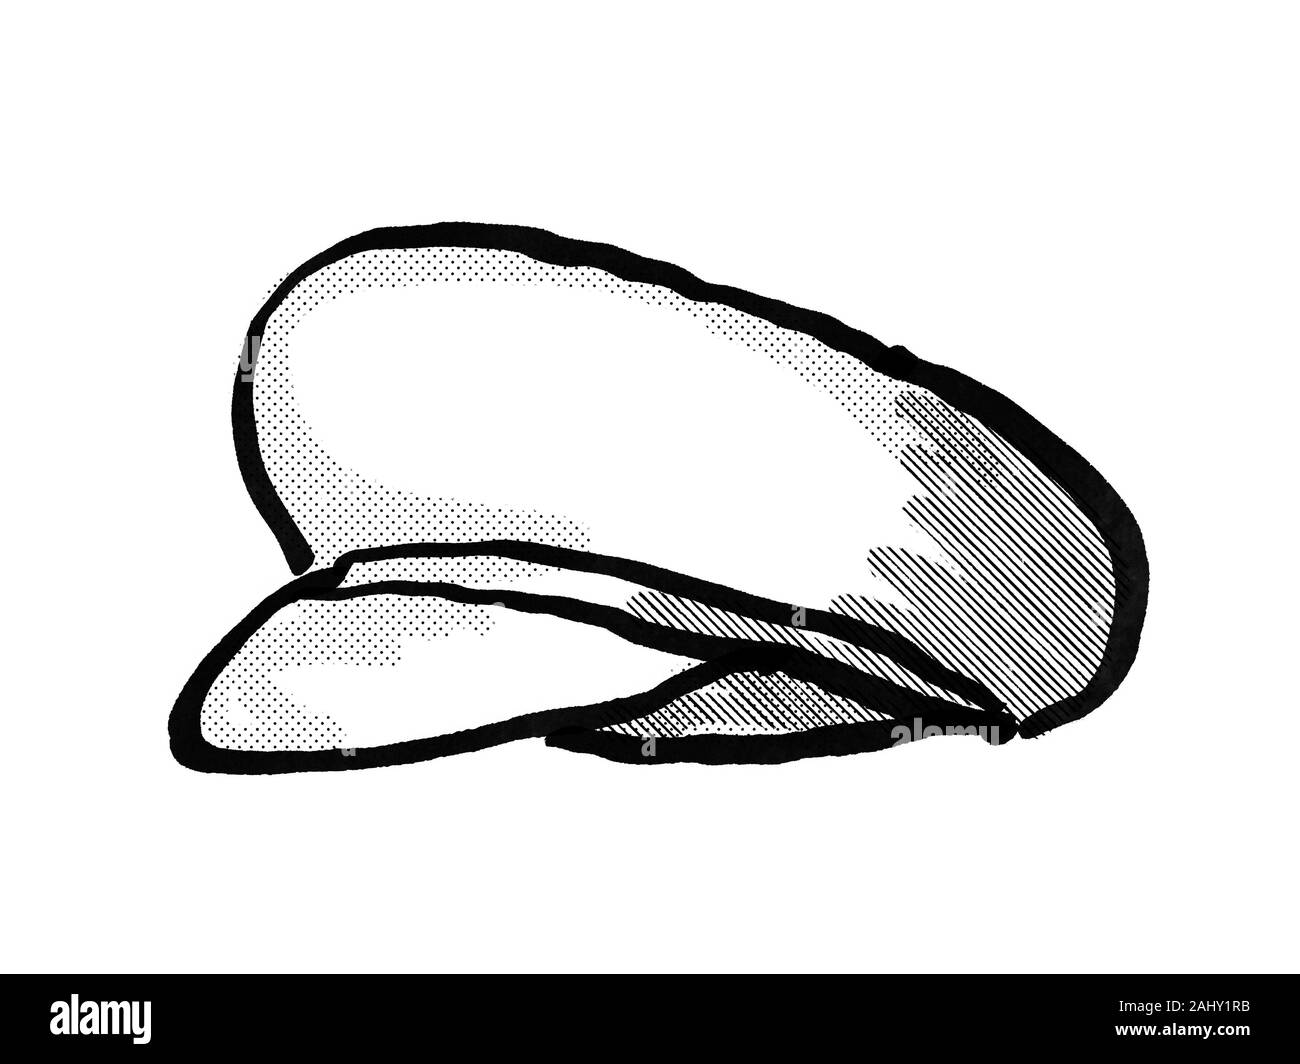 Retro cartoon style drawing of a cheesecutter, flat cap, scally cap, a rounded cap with a small stiff brim in front on isolated white background done Stock Photo